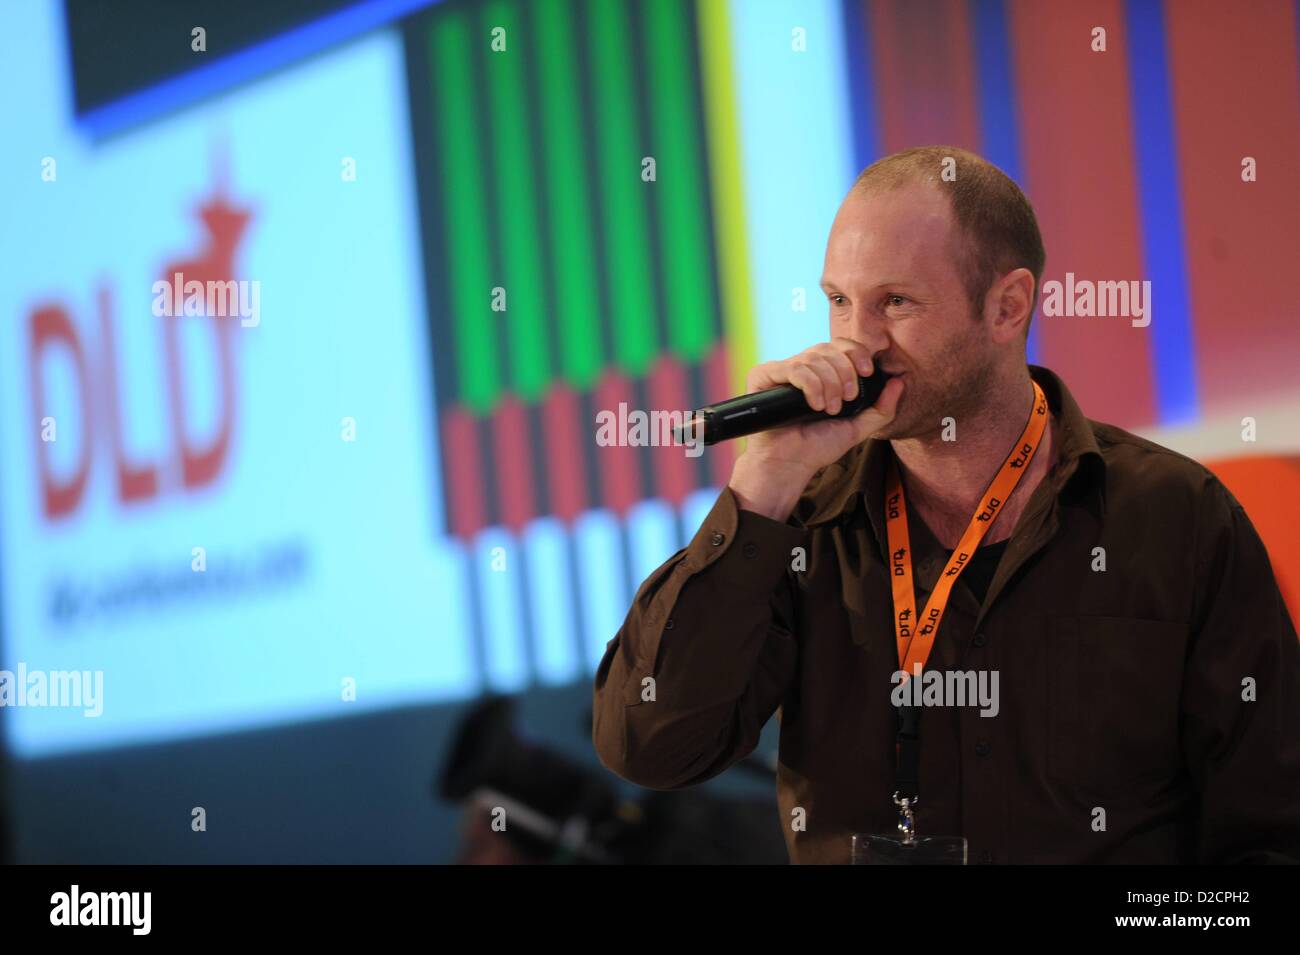 MUNICH/GERMANY - JANUARY 20: Baba Brinkman (Rap-Artist) performs on the podium during the Digital Life Design (DLD) Conference at the HVB Forum on January 20, 2013 in Munich, Germany. DLD is an international conference and culture which connects new media, business and social leaders, opinion formers and investors for crossover conversation and inspiration. (Photo: picture alliance/Jan Haas) Stock Photo